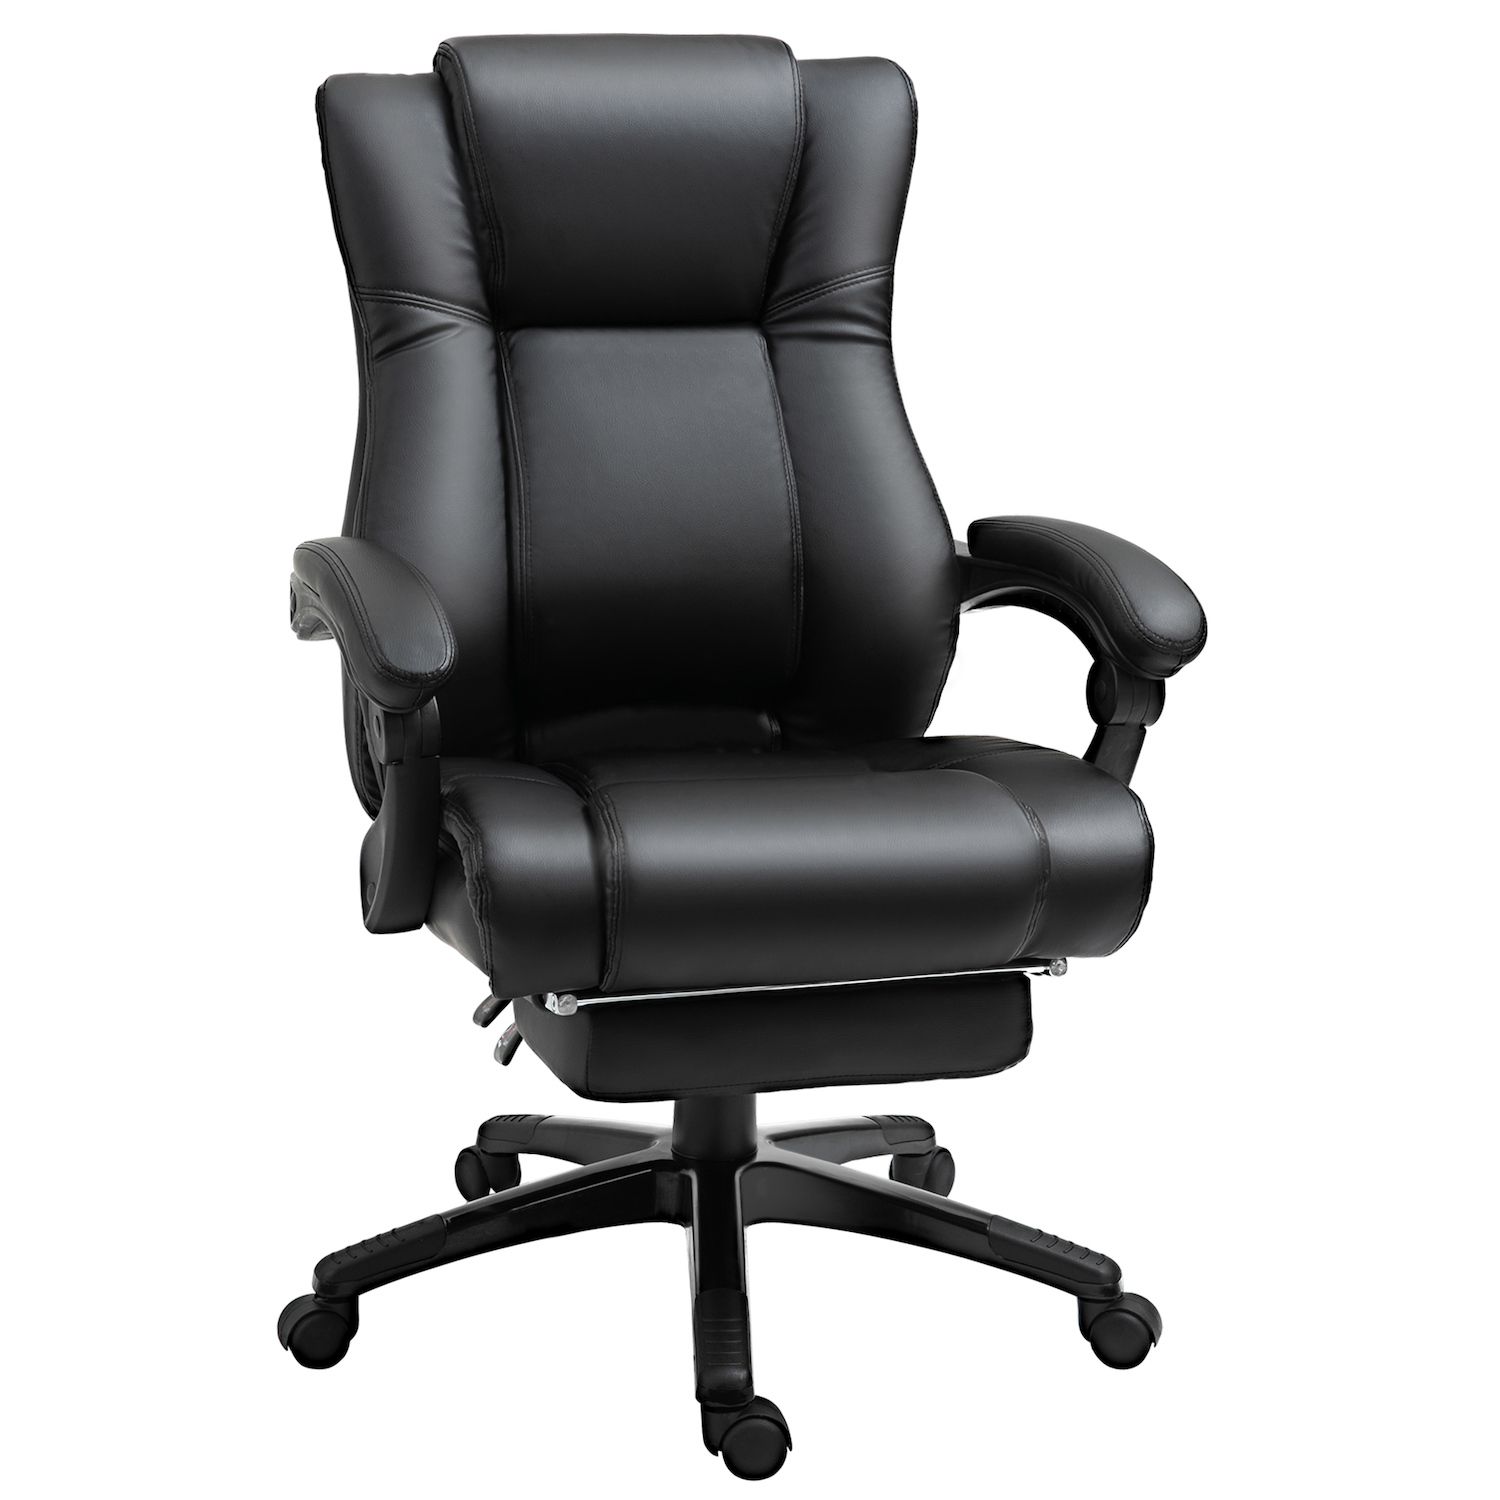 Vinsetto Big and Tall Executive Office Chair with High Back Diamond Stitching Adjustable Height & Swivel Wheels Brown